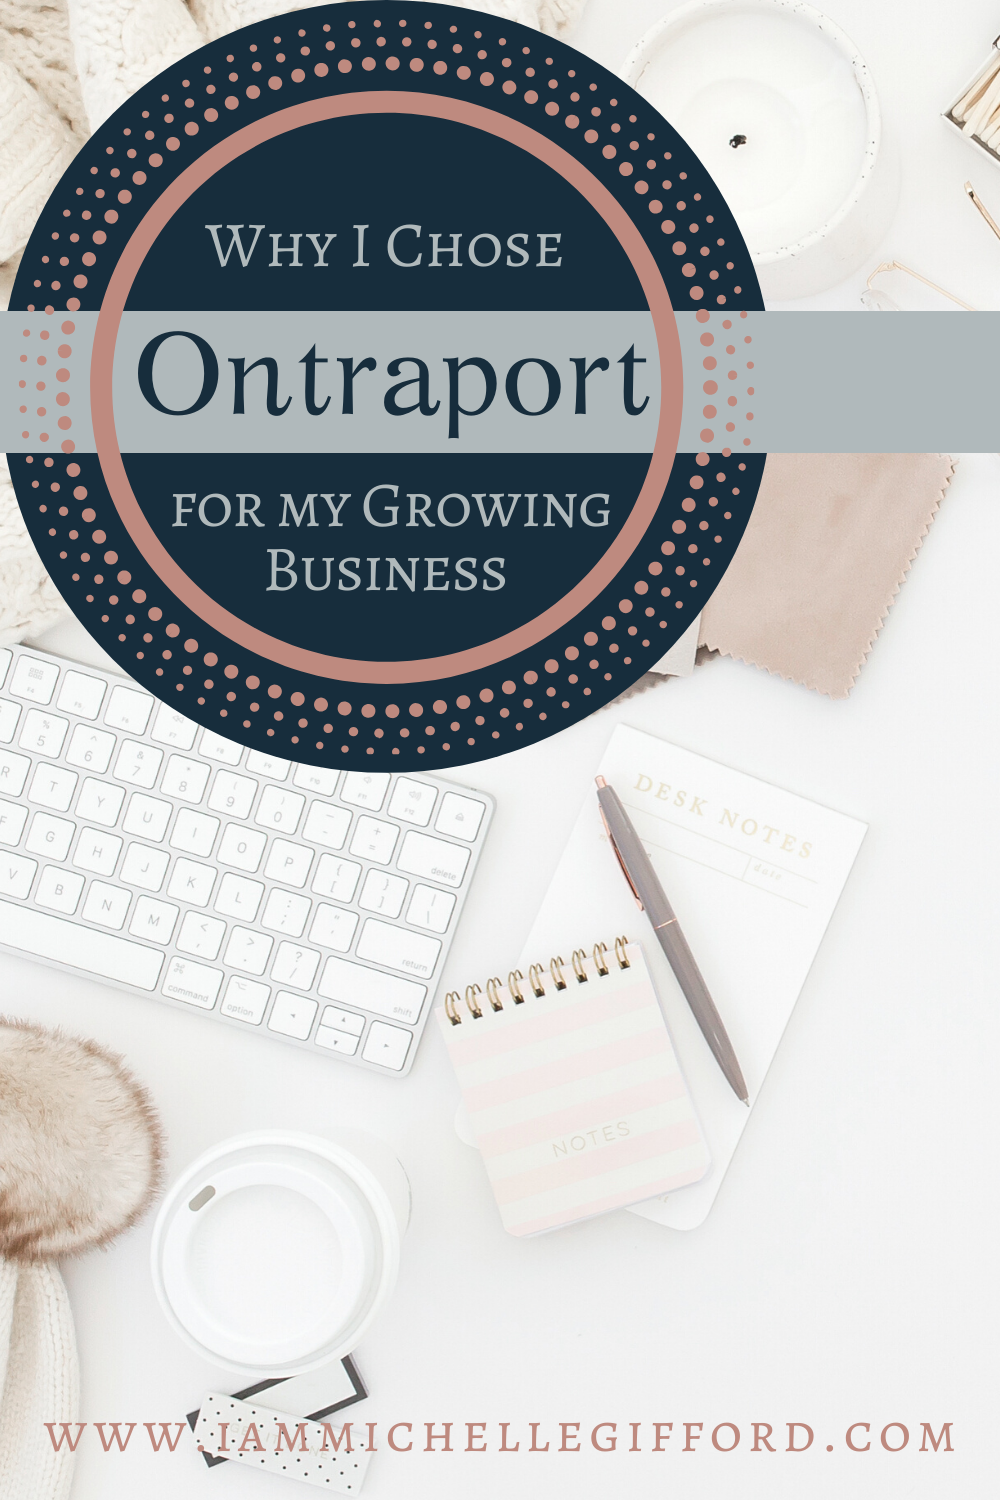 Why I chose Ontrport for my growing business- creative business solutions www.iammichellegifford.com